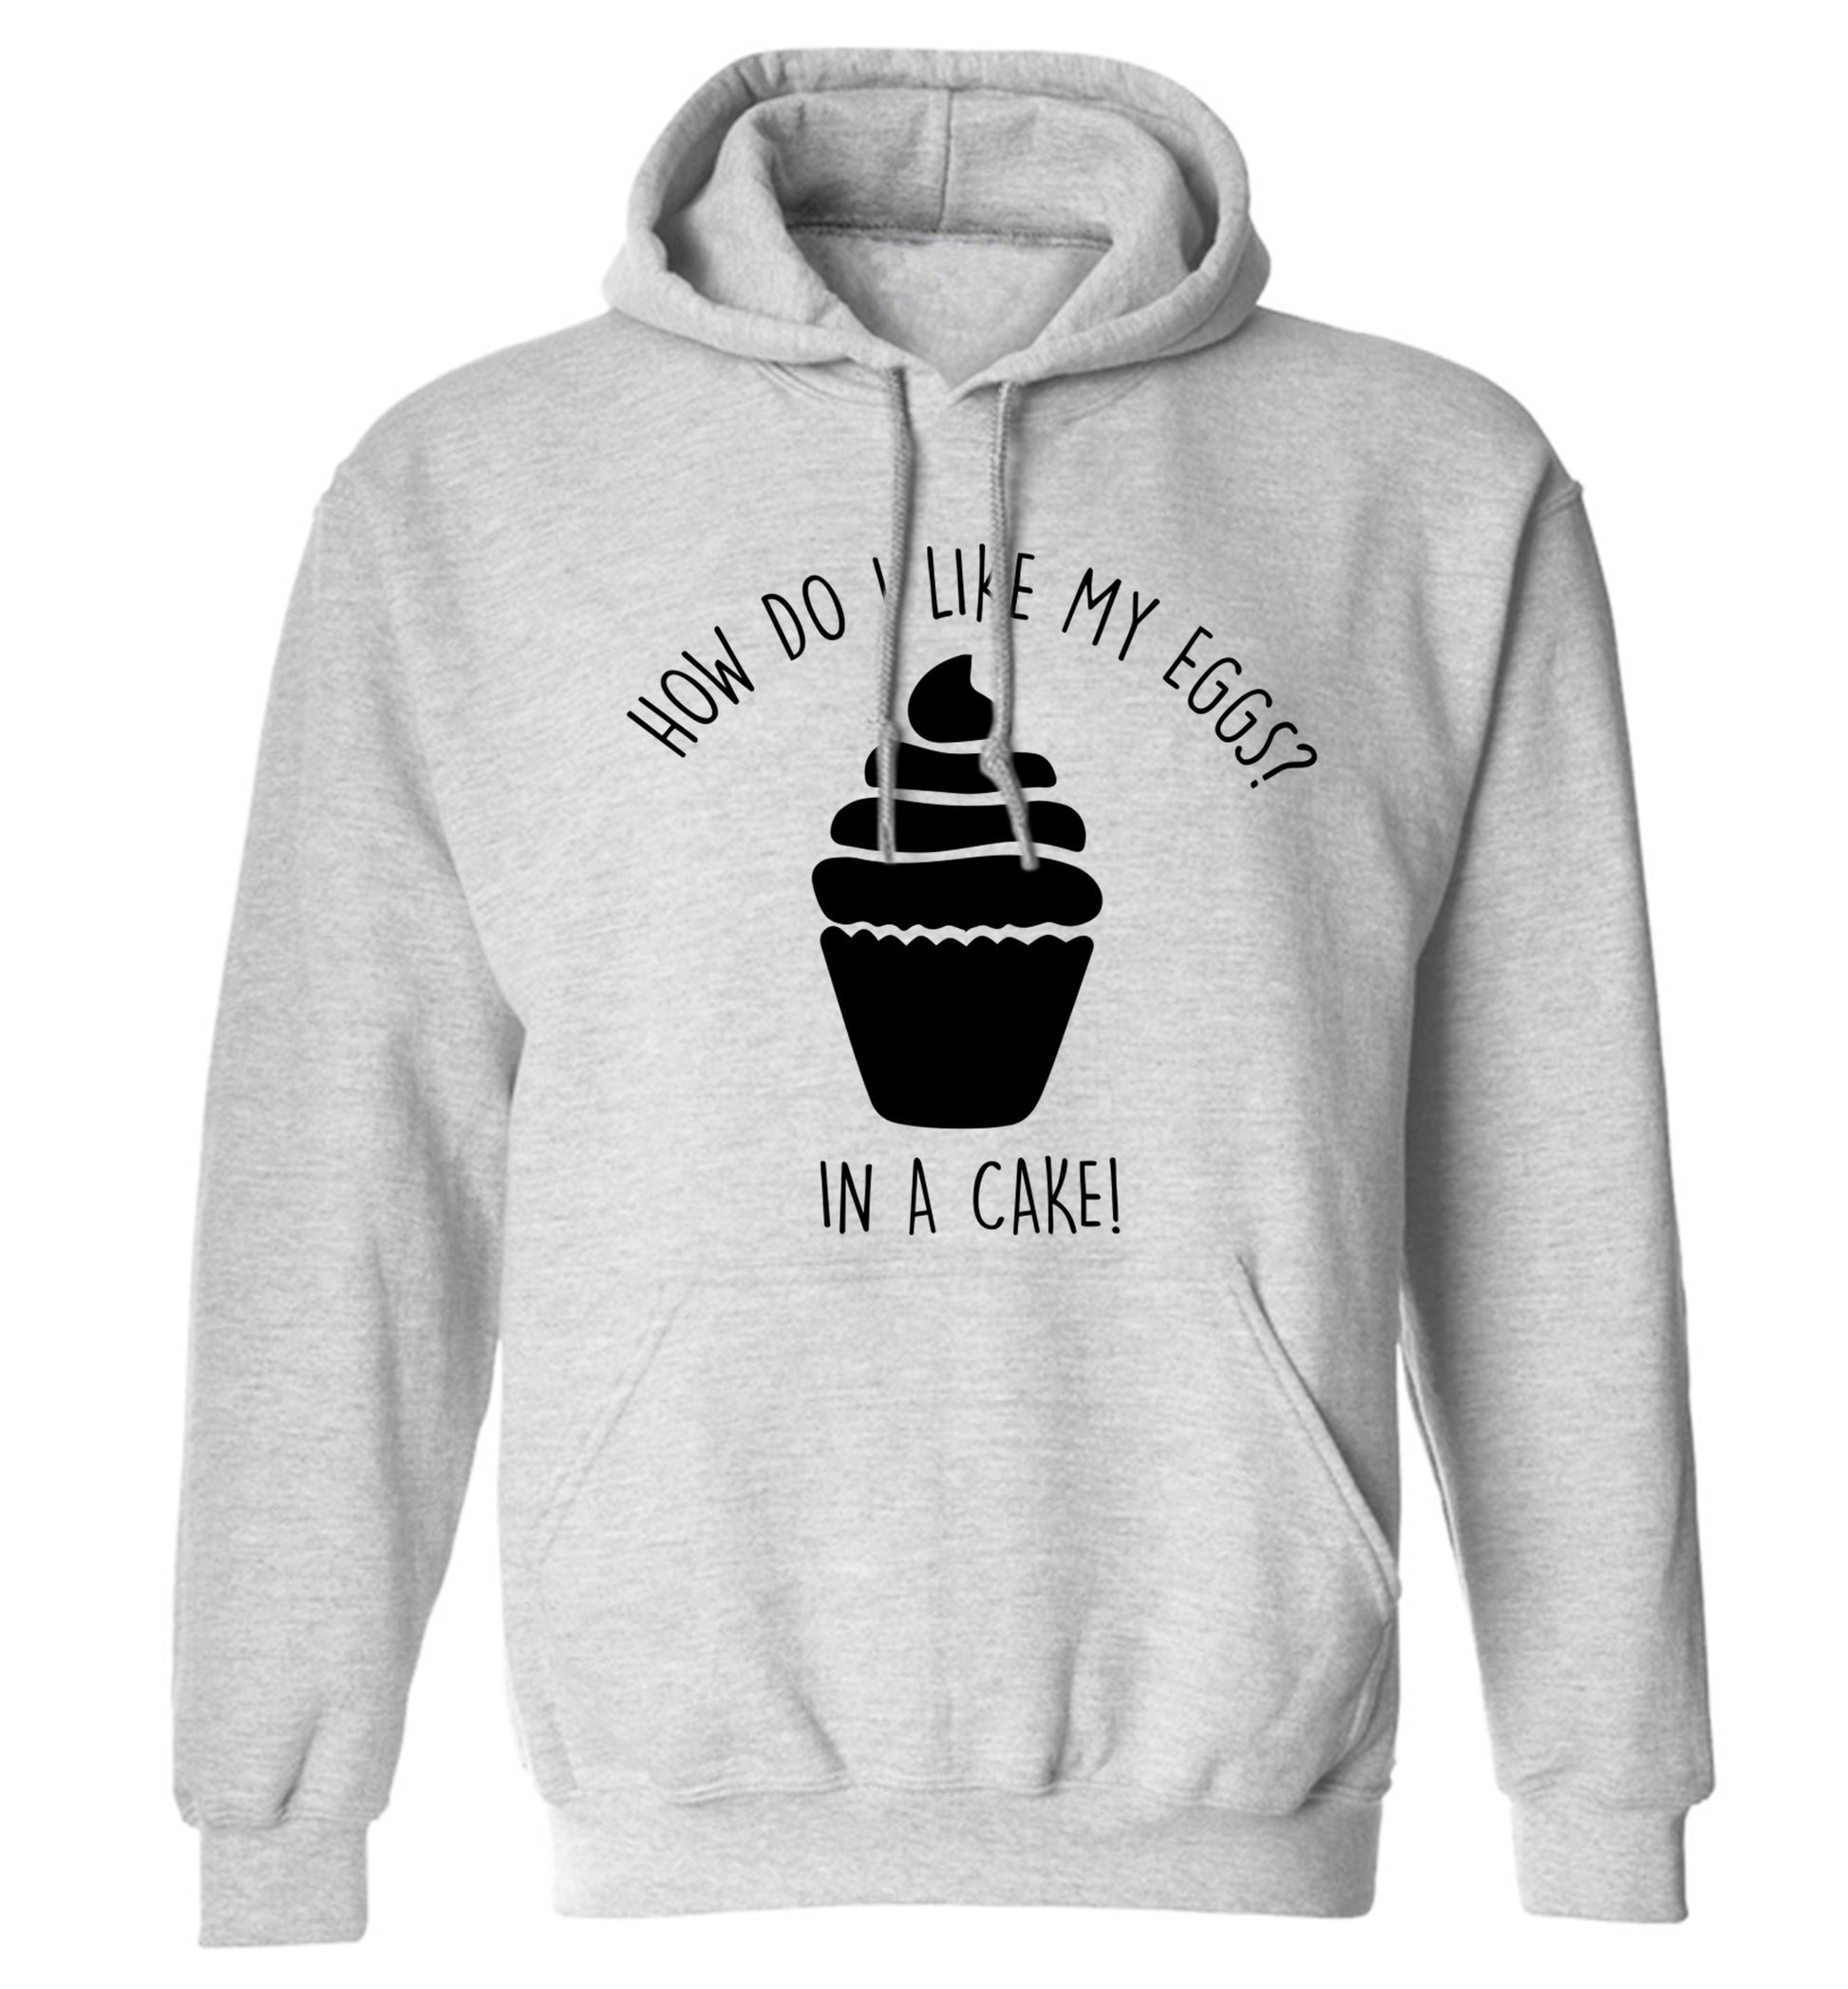 How do I like my eggs? In a cake! adults unisex grey hoodie 2XL